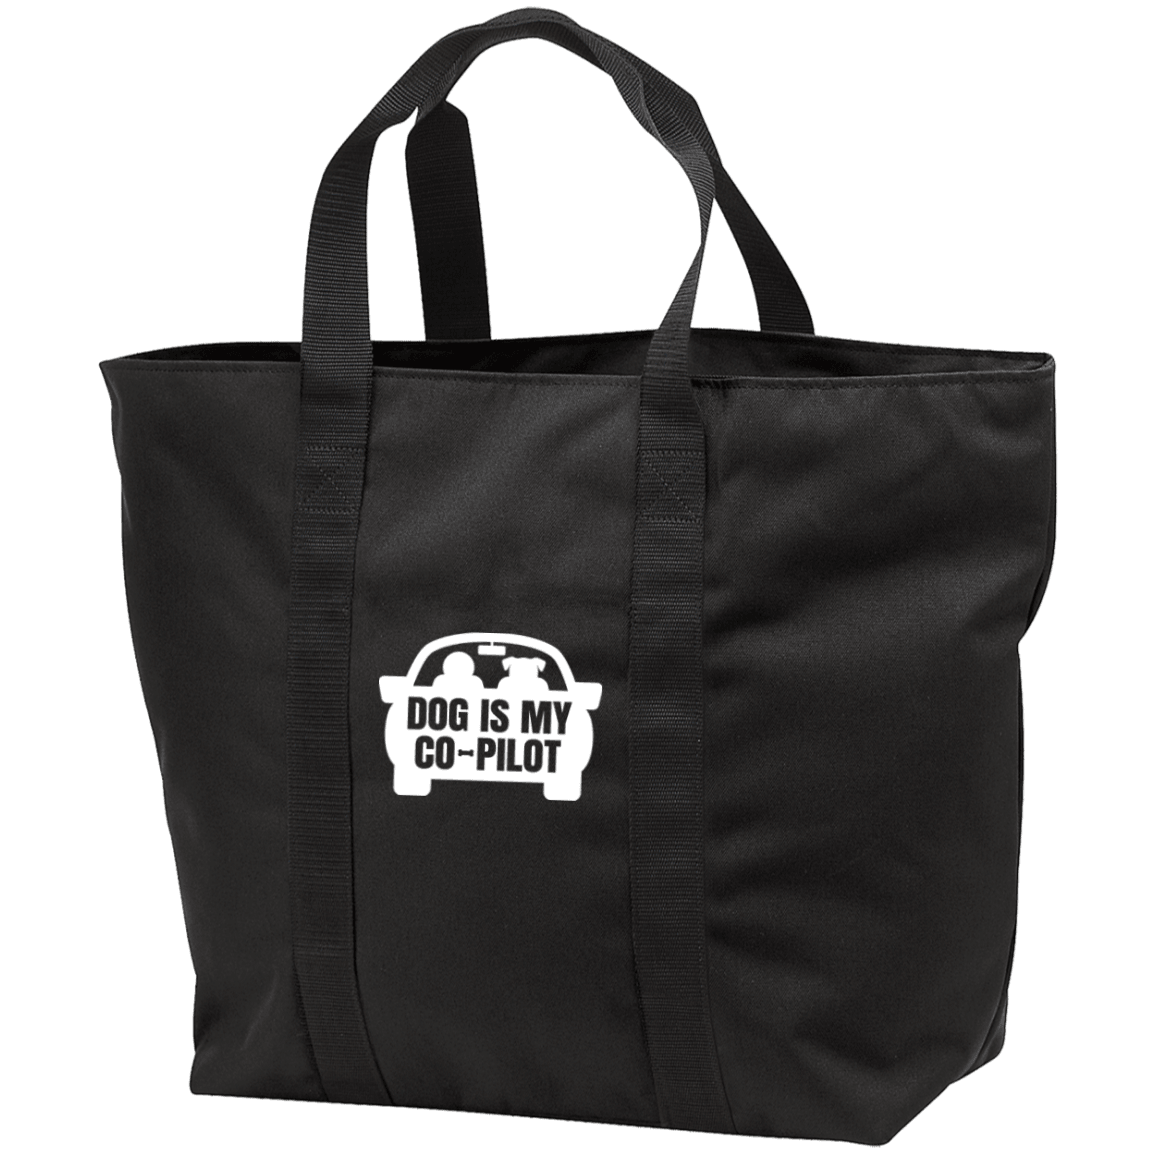 Designs by MyUtopia Shout Out:Dog is My Co-Pilot Embroidered All Purpose Tote Bag w Zipper Closure and side pocket,Black/Black / One Size,Totebag